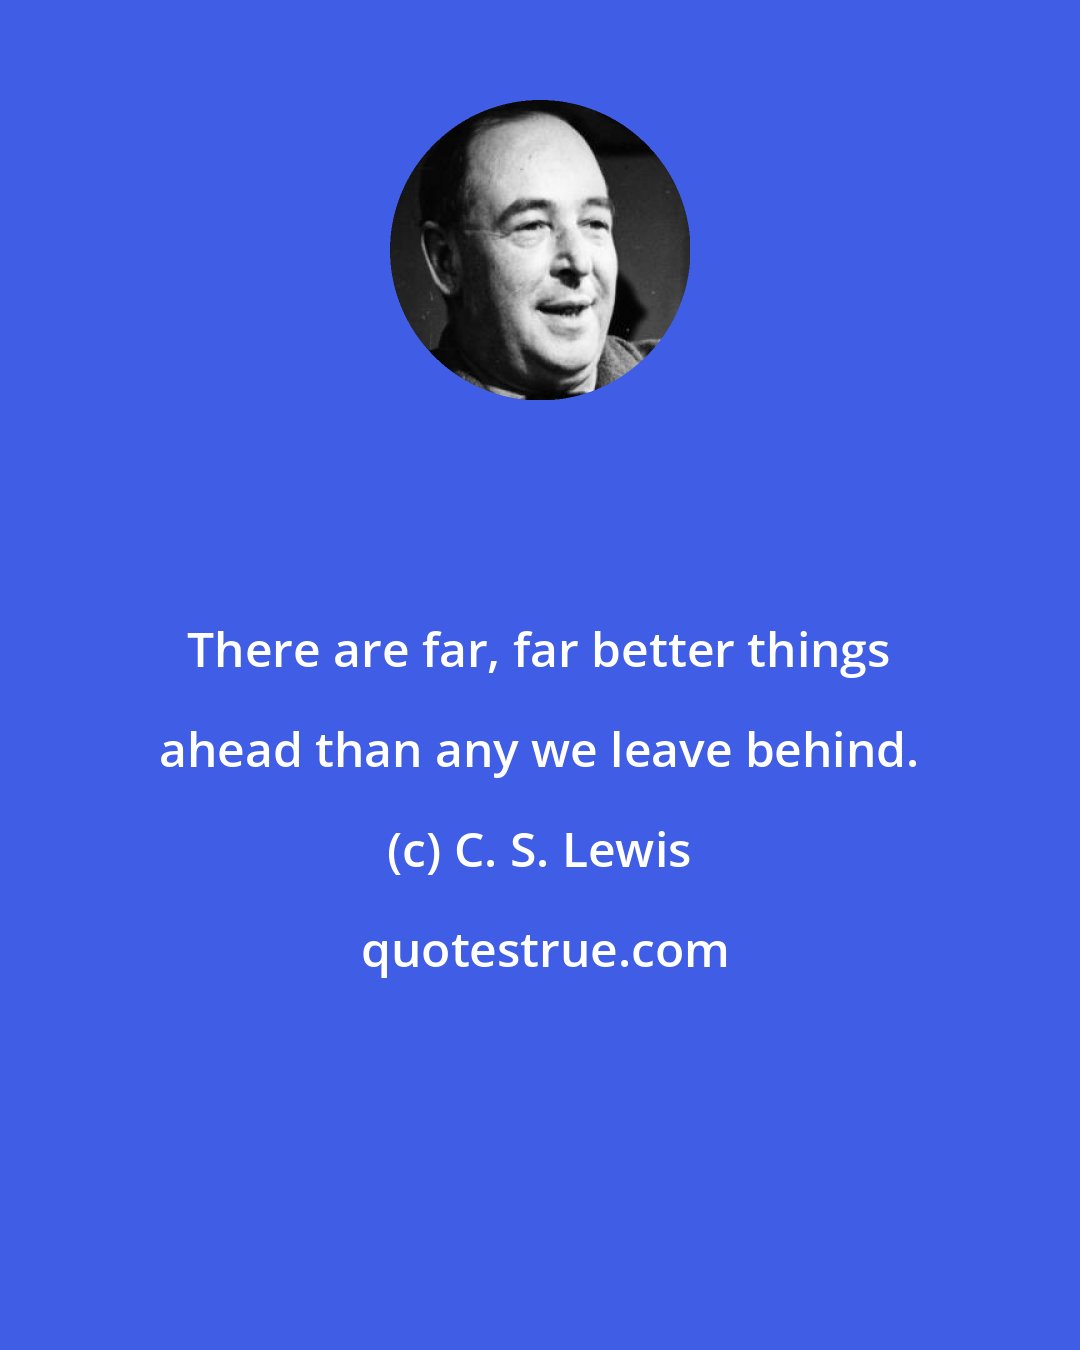 C. S. Lewis: There are far, far better things ahead than any we leave behind.